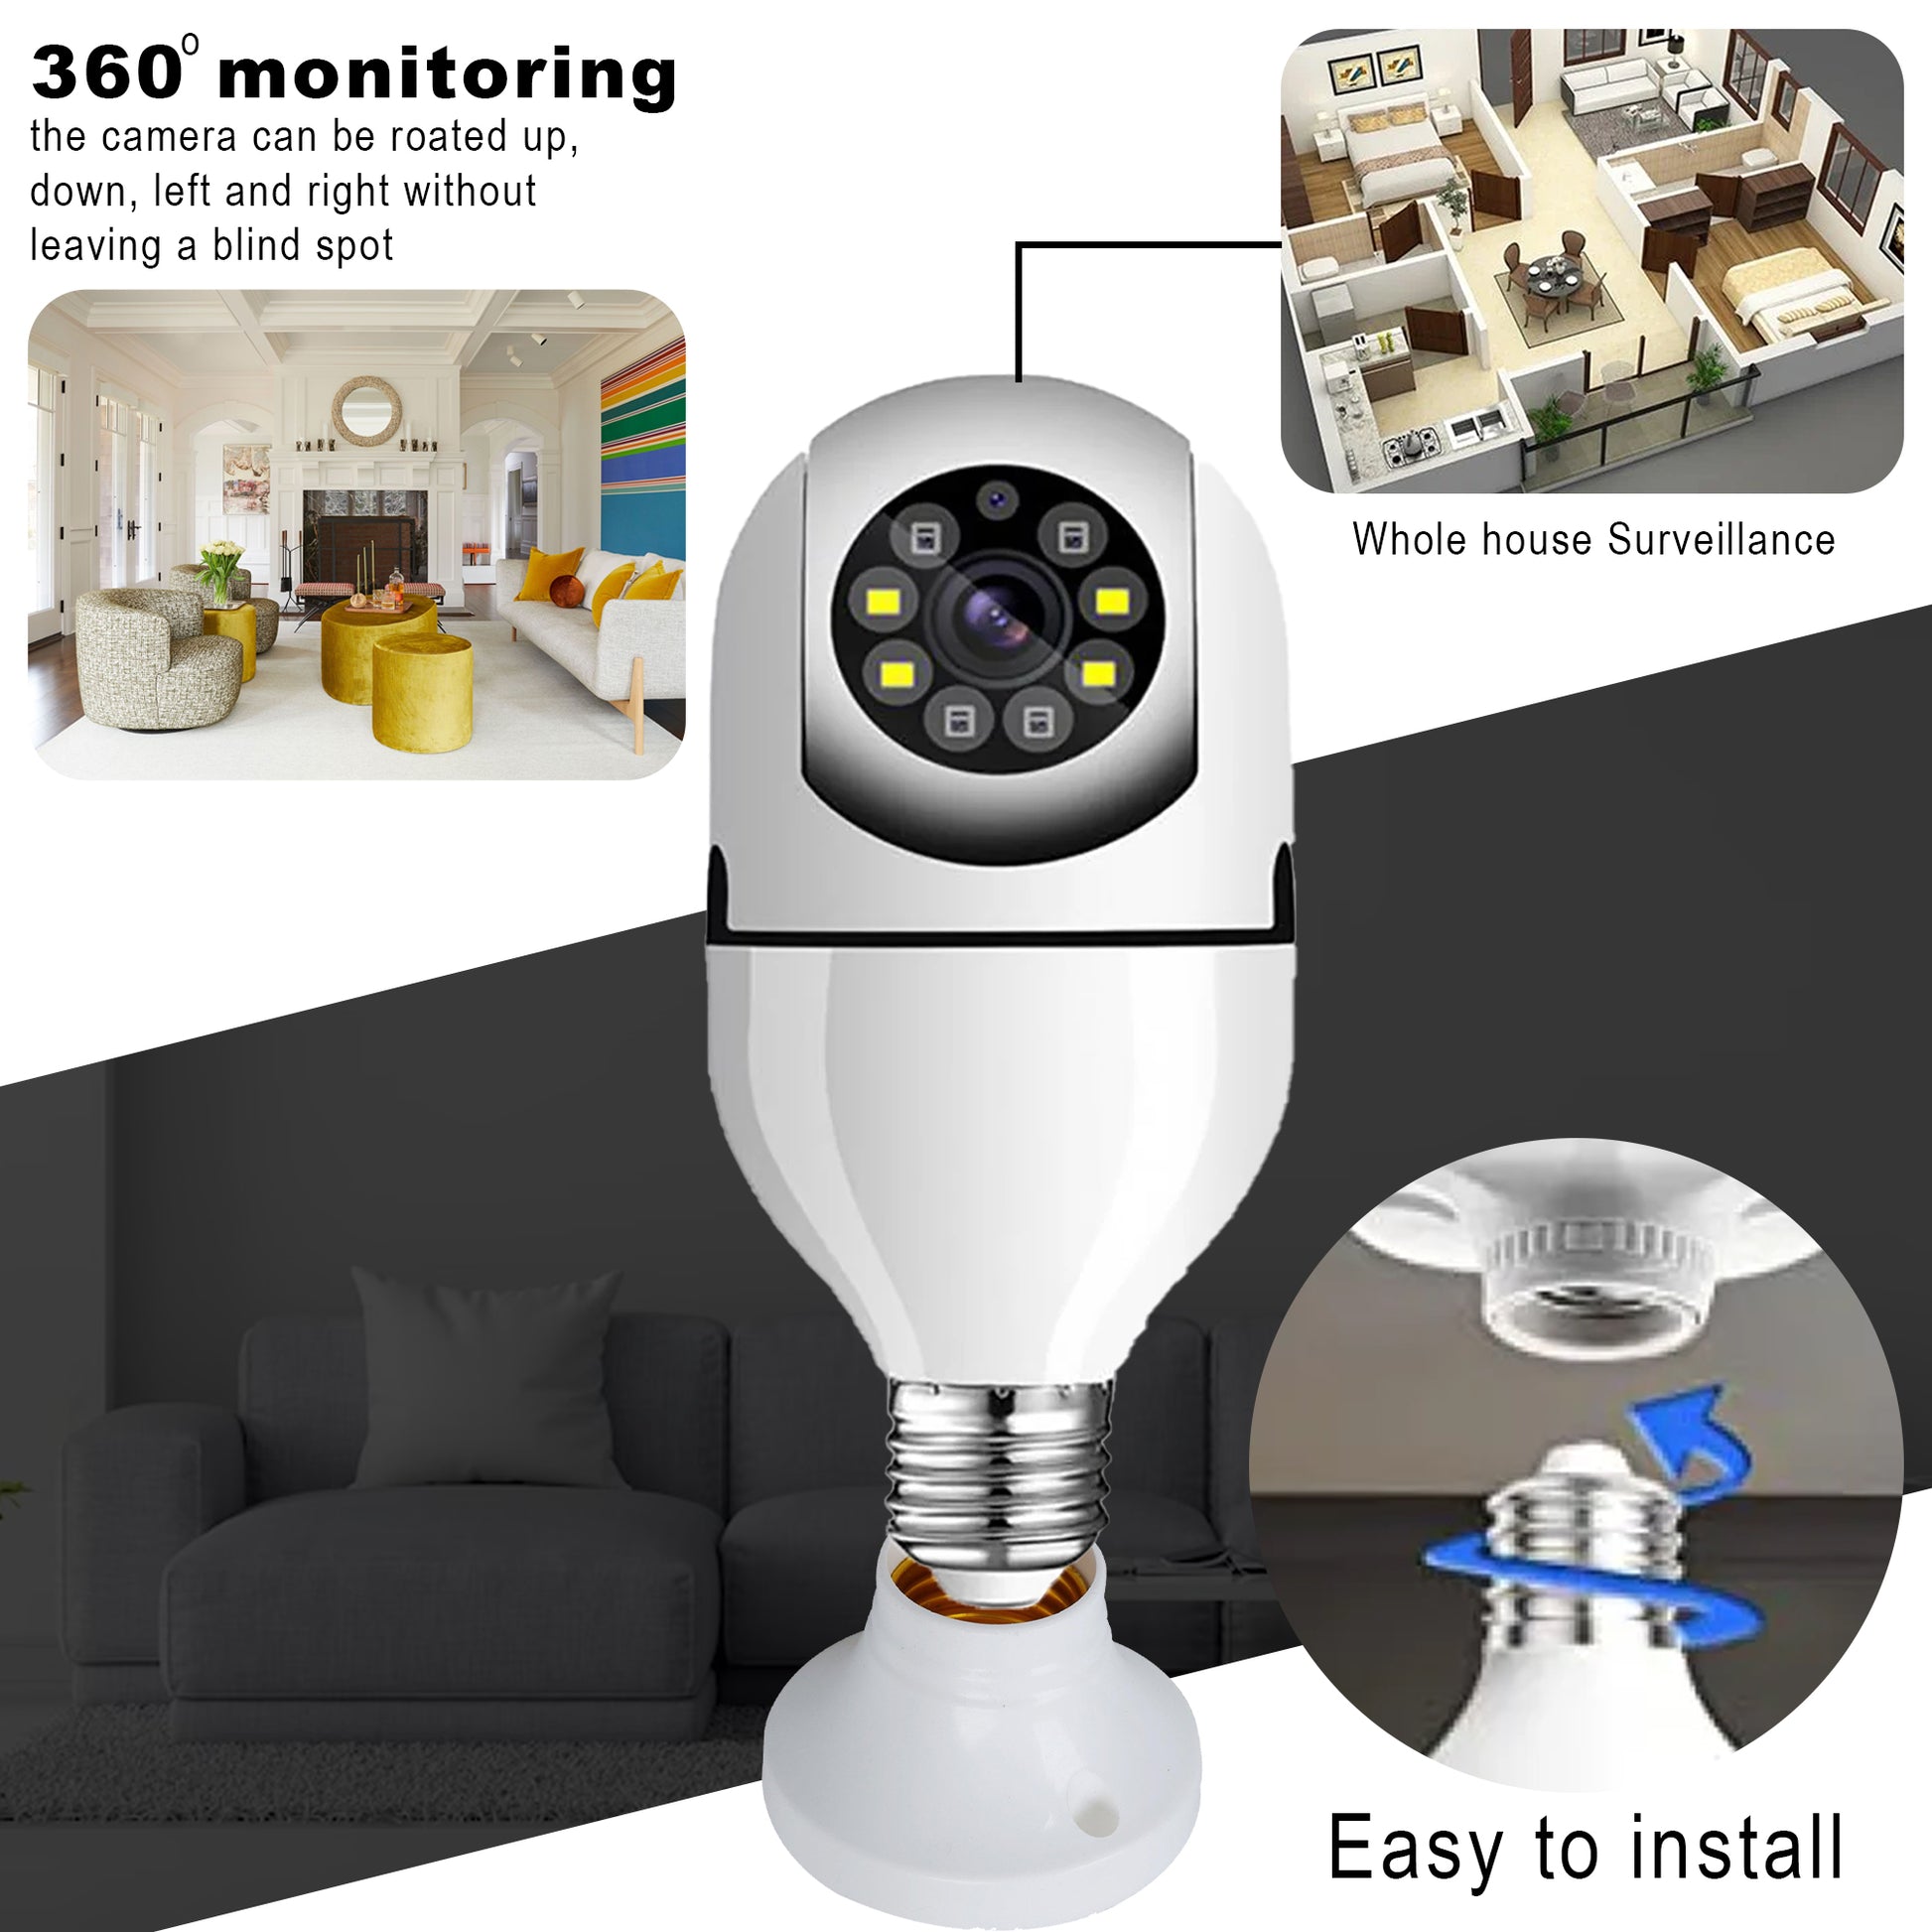  360° Wireless Light Bulb Security Camera easy to install for whole house surveillance 